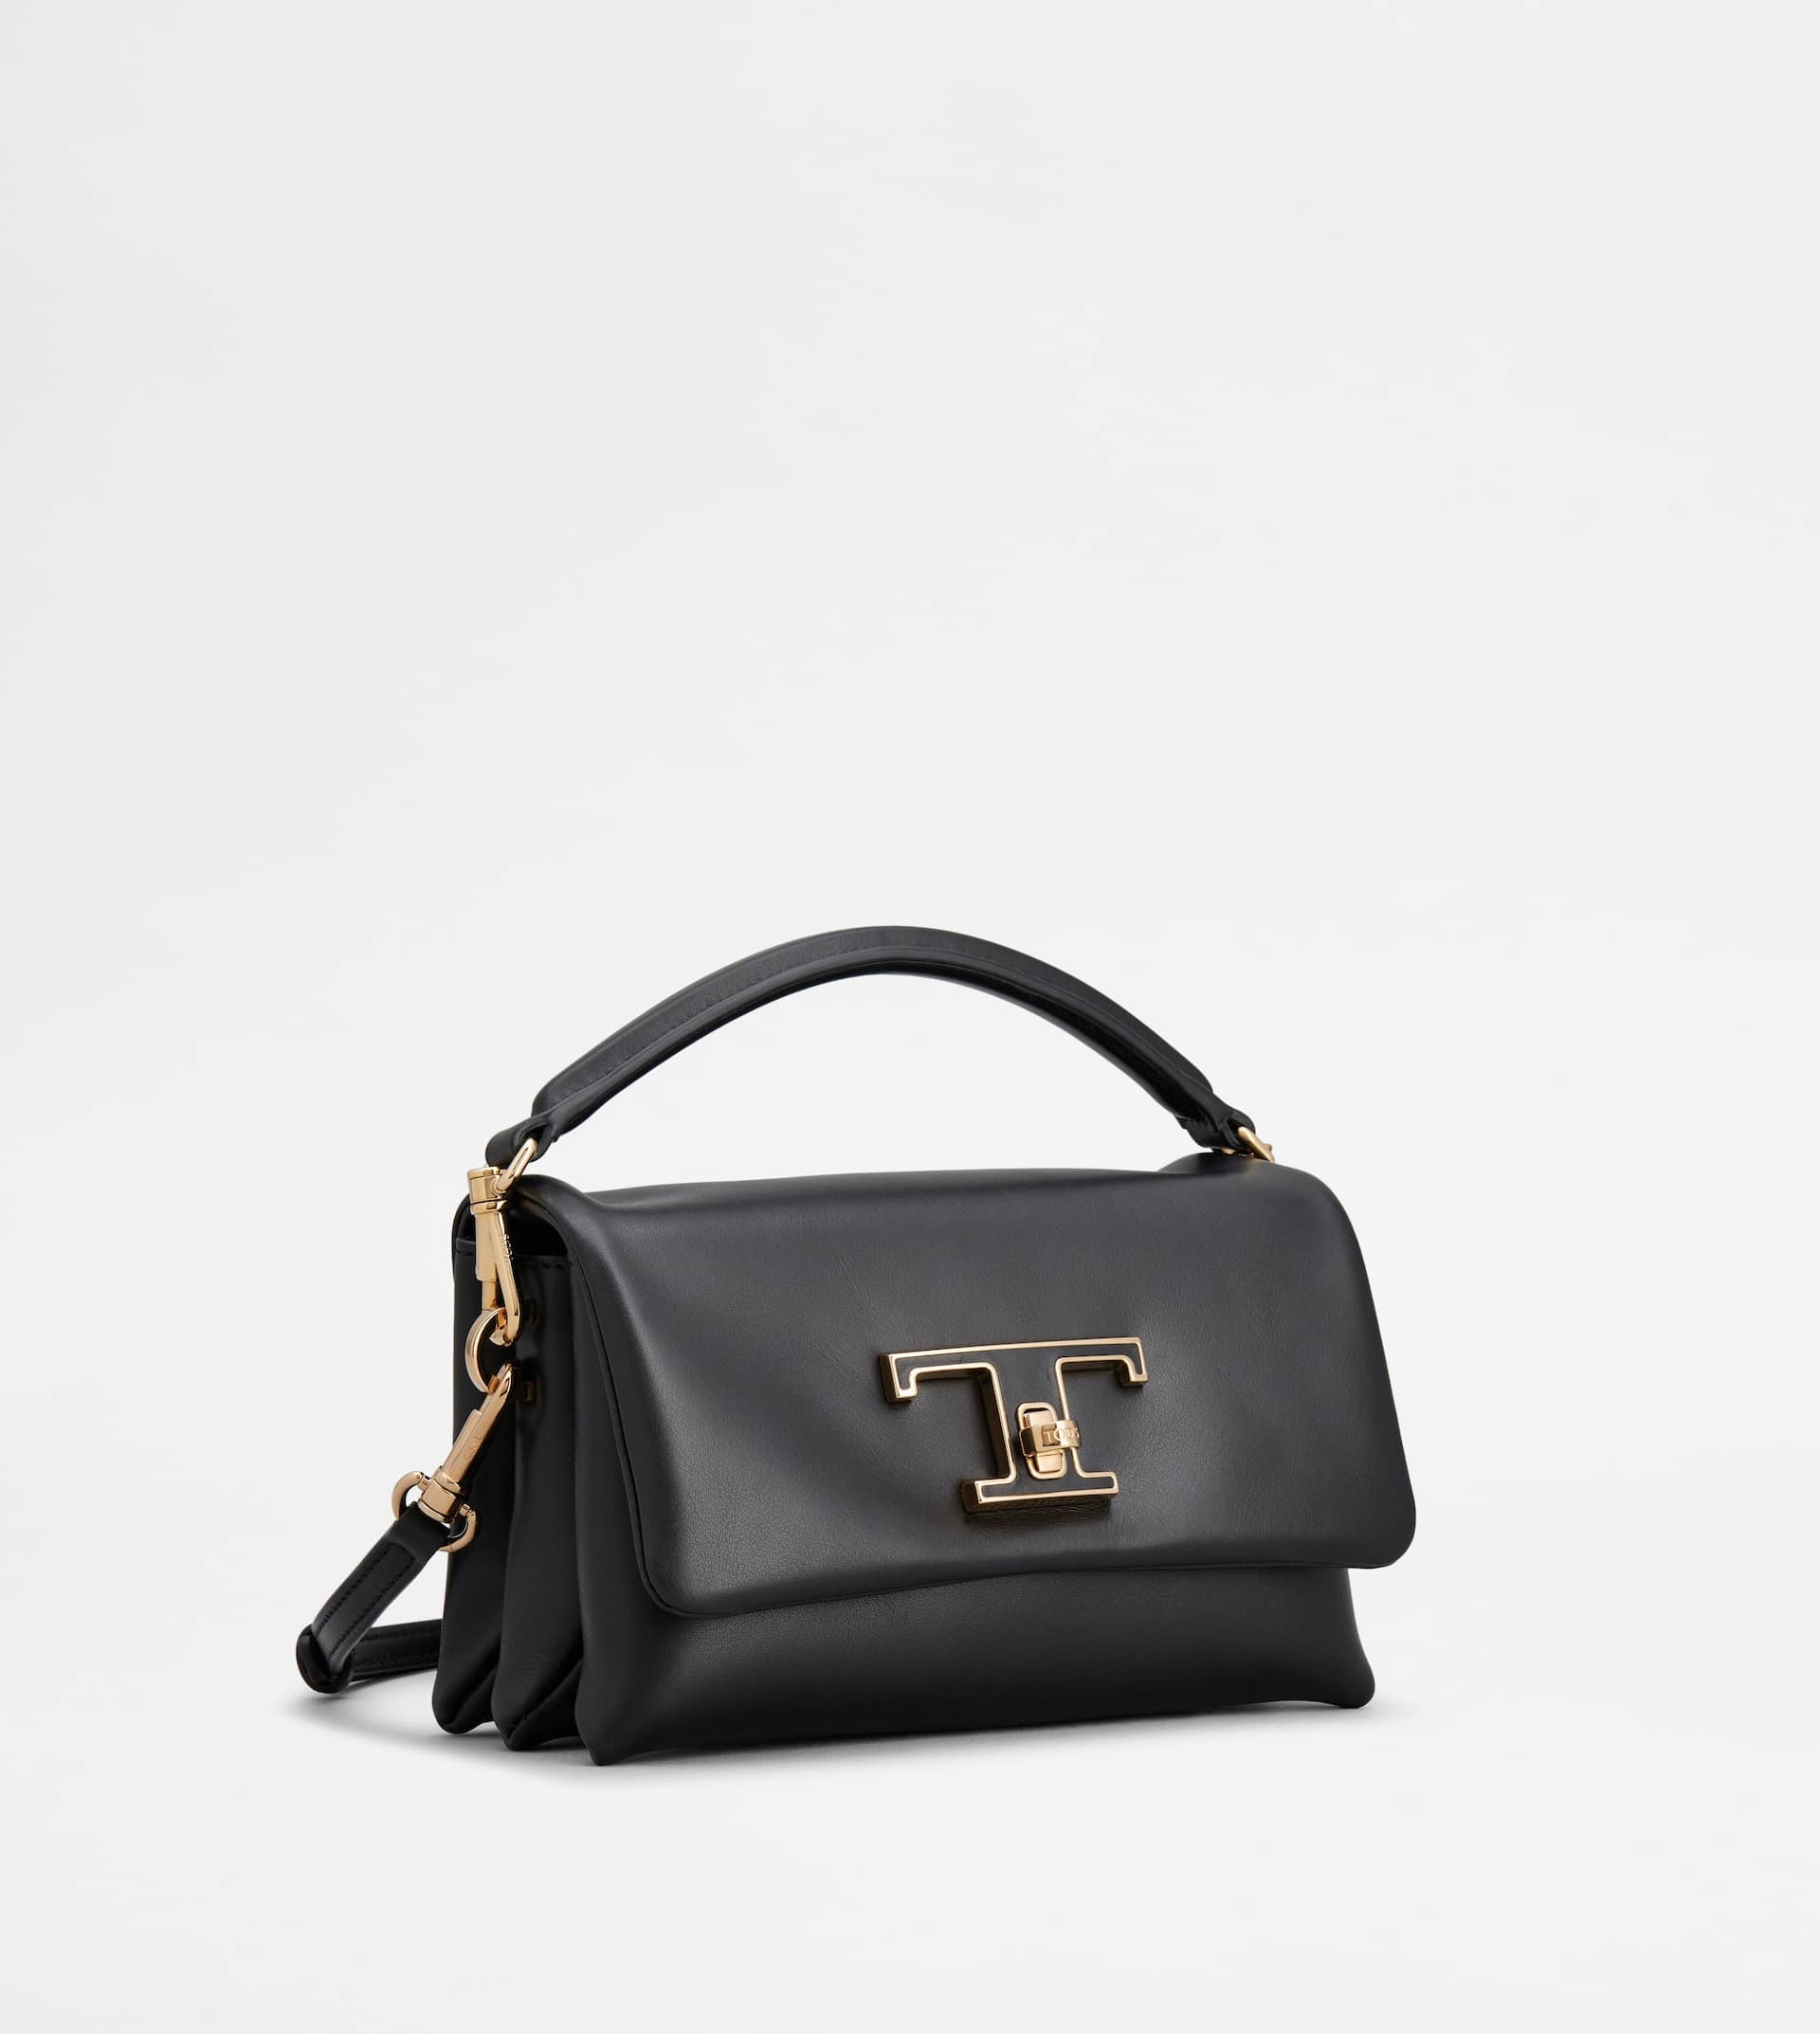 T TIMELESS FLAP BAG IN LEATHER MICRO - BLACK - 3